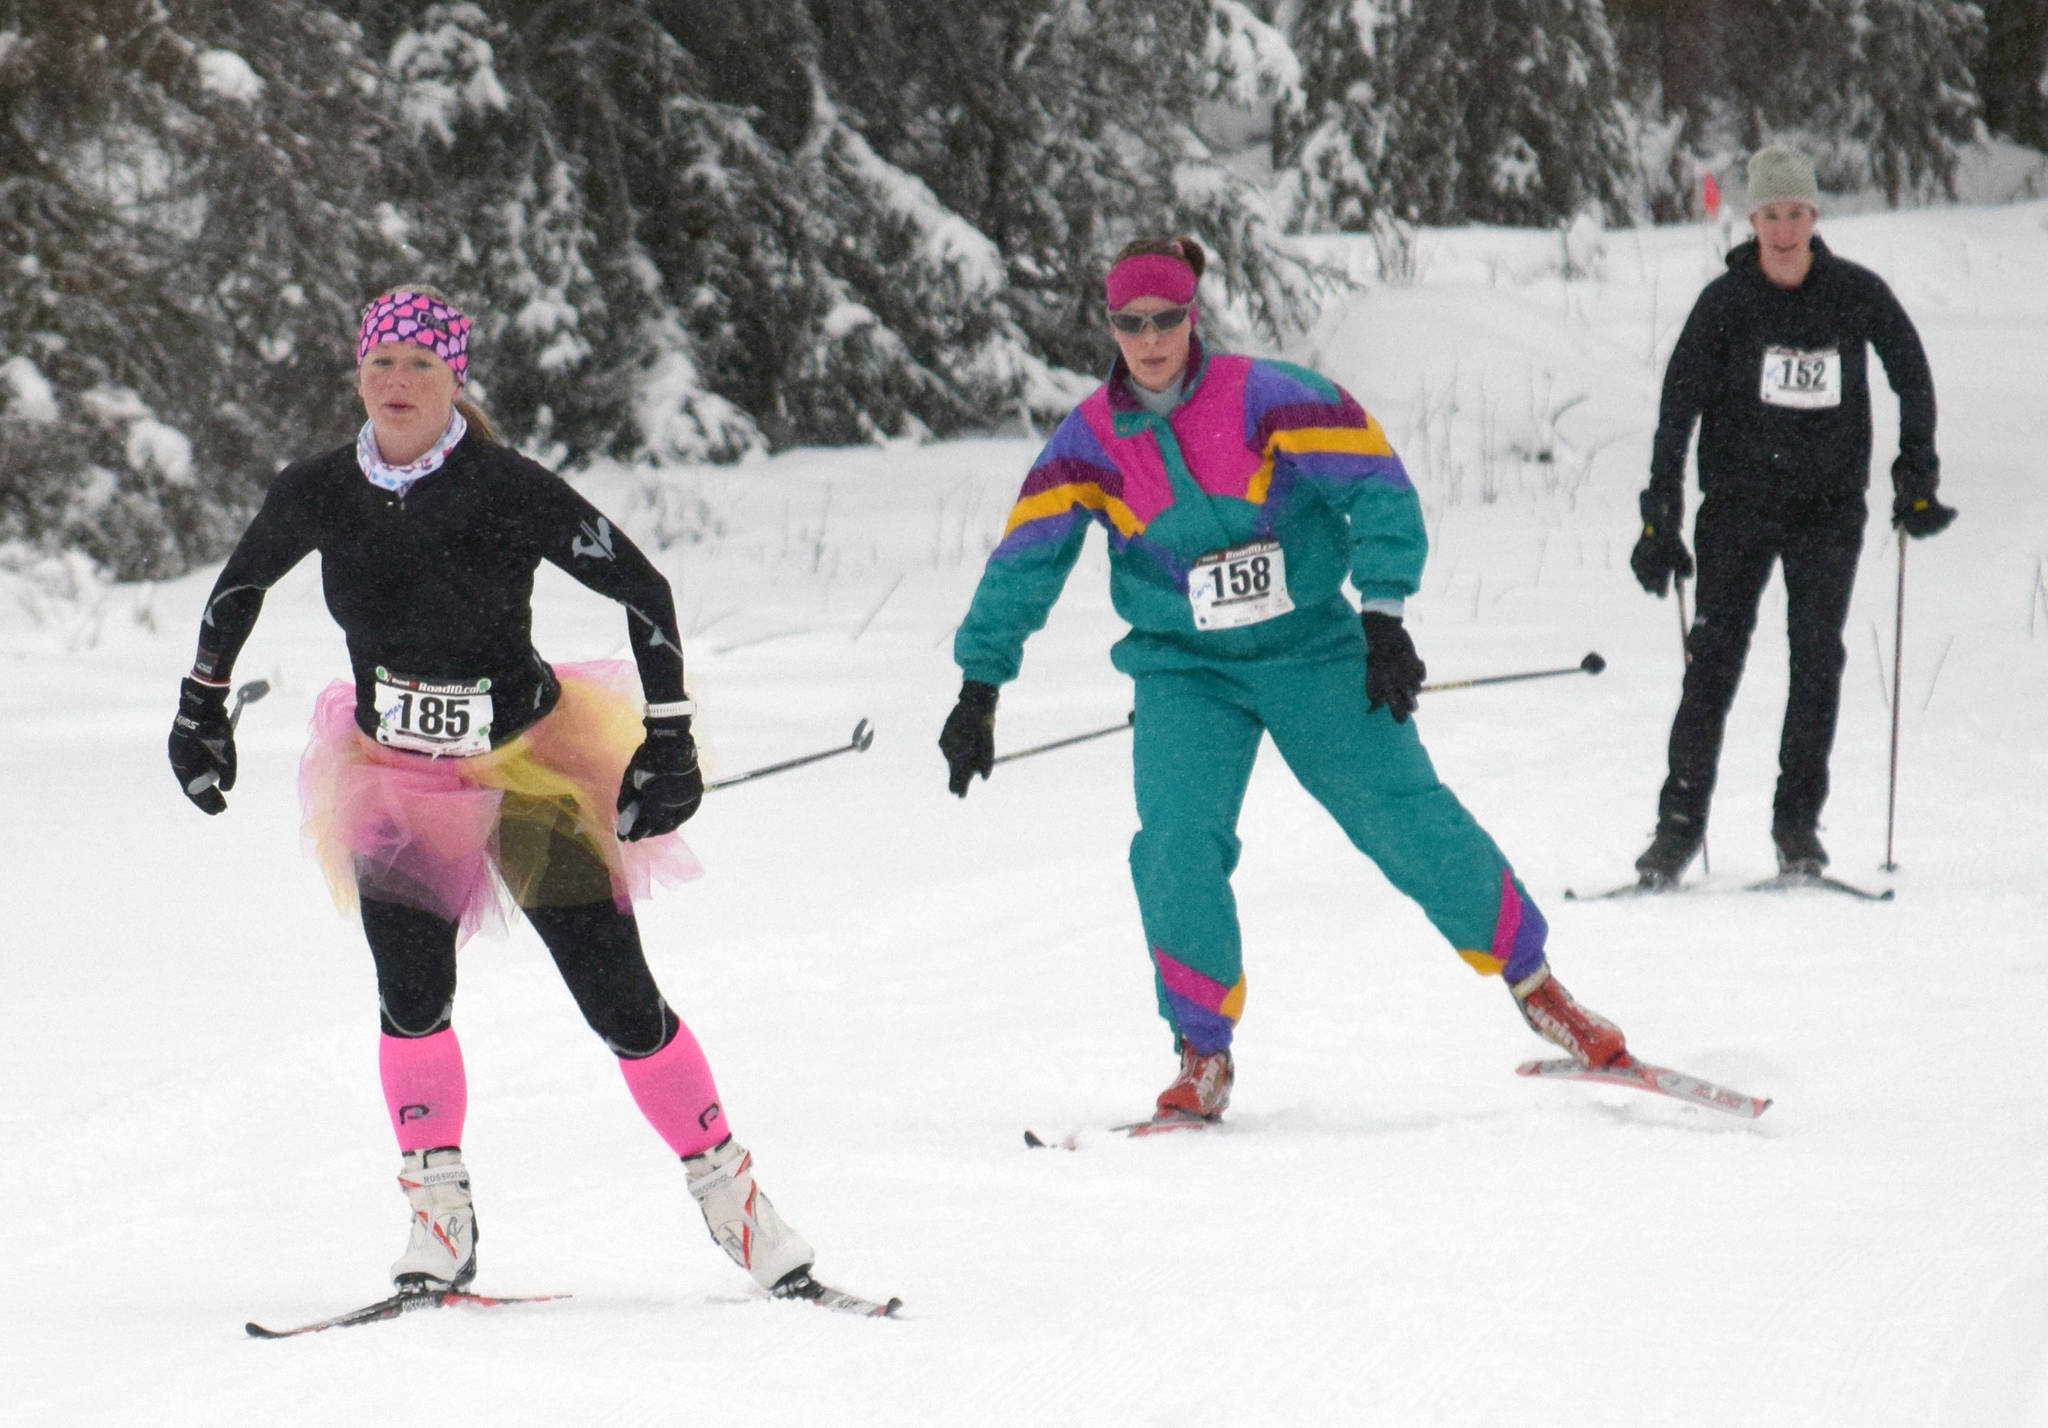 Eventual race winner Morgan Aldridge leads Carly Reimer and Amy Anderson at the Ski for Women on Sunday, Feb. 3, 2019, at Tsalteshi Trails. (Photo by Jeff Helminiak/Peninsula Clarion)